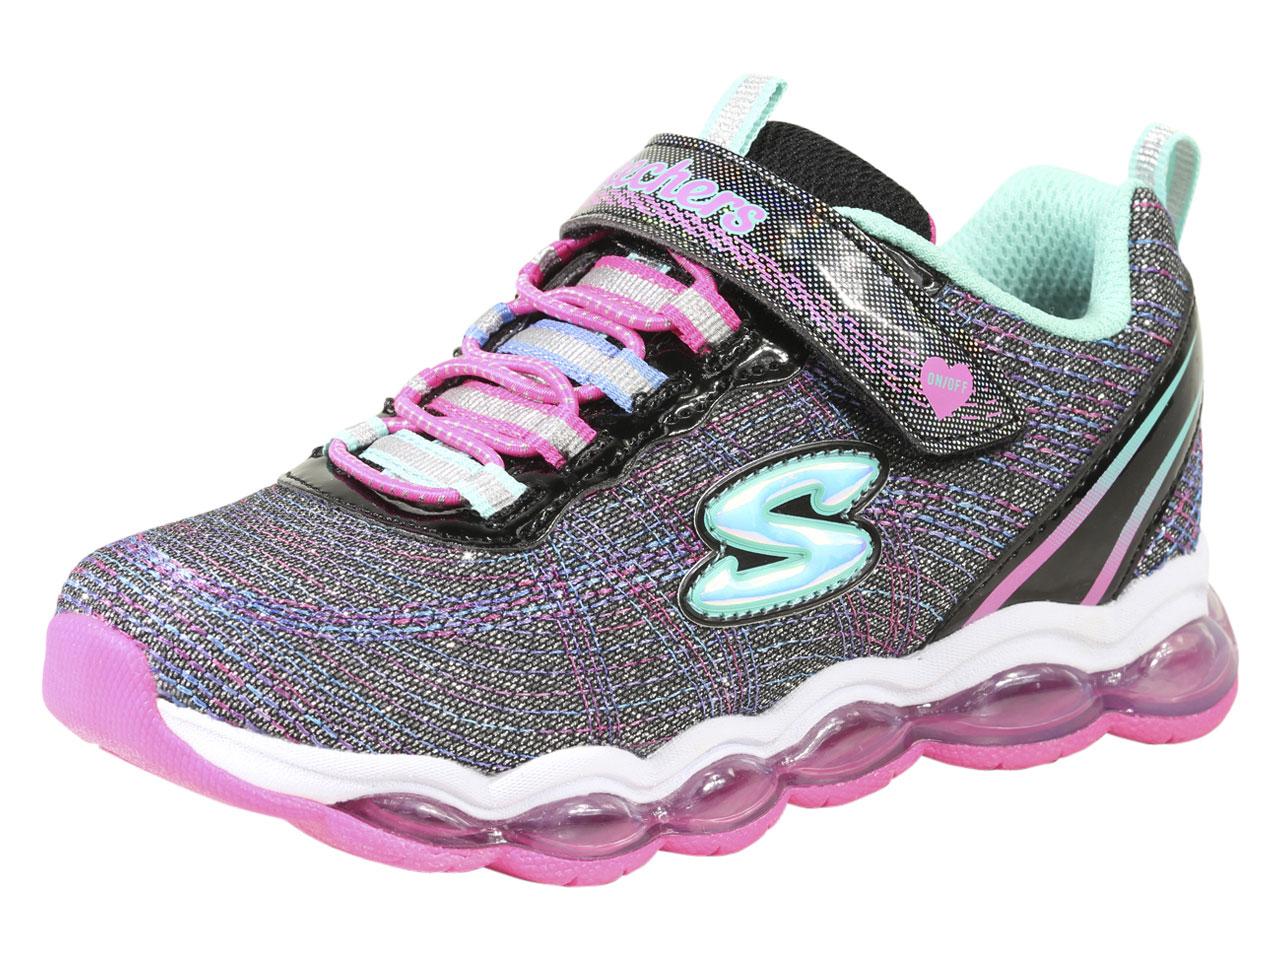 skechers light up shoes south africa